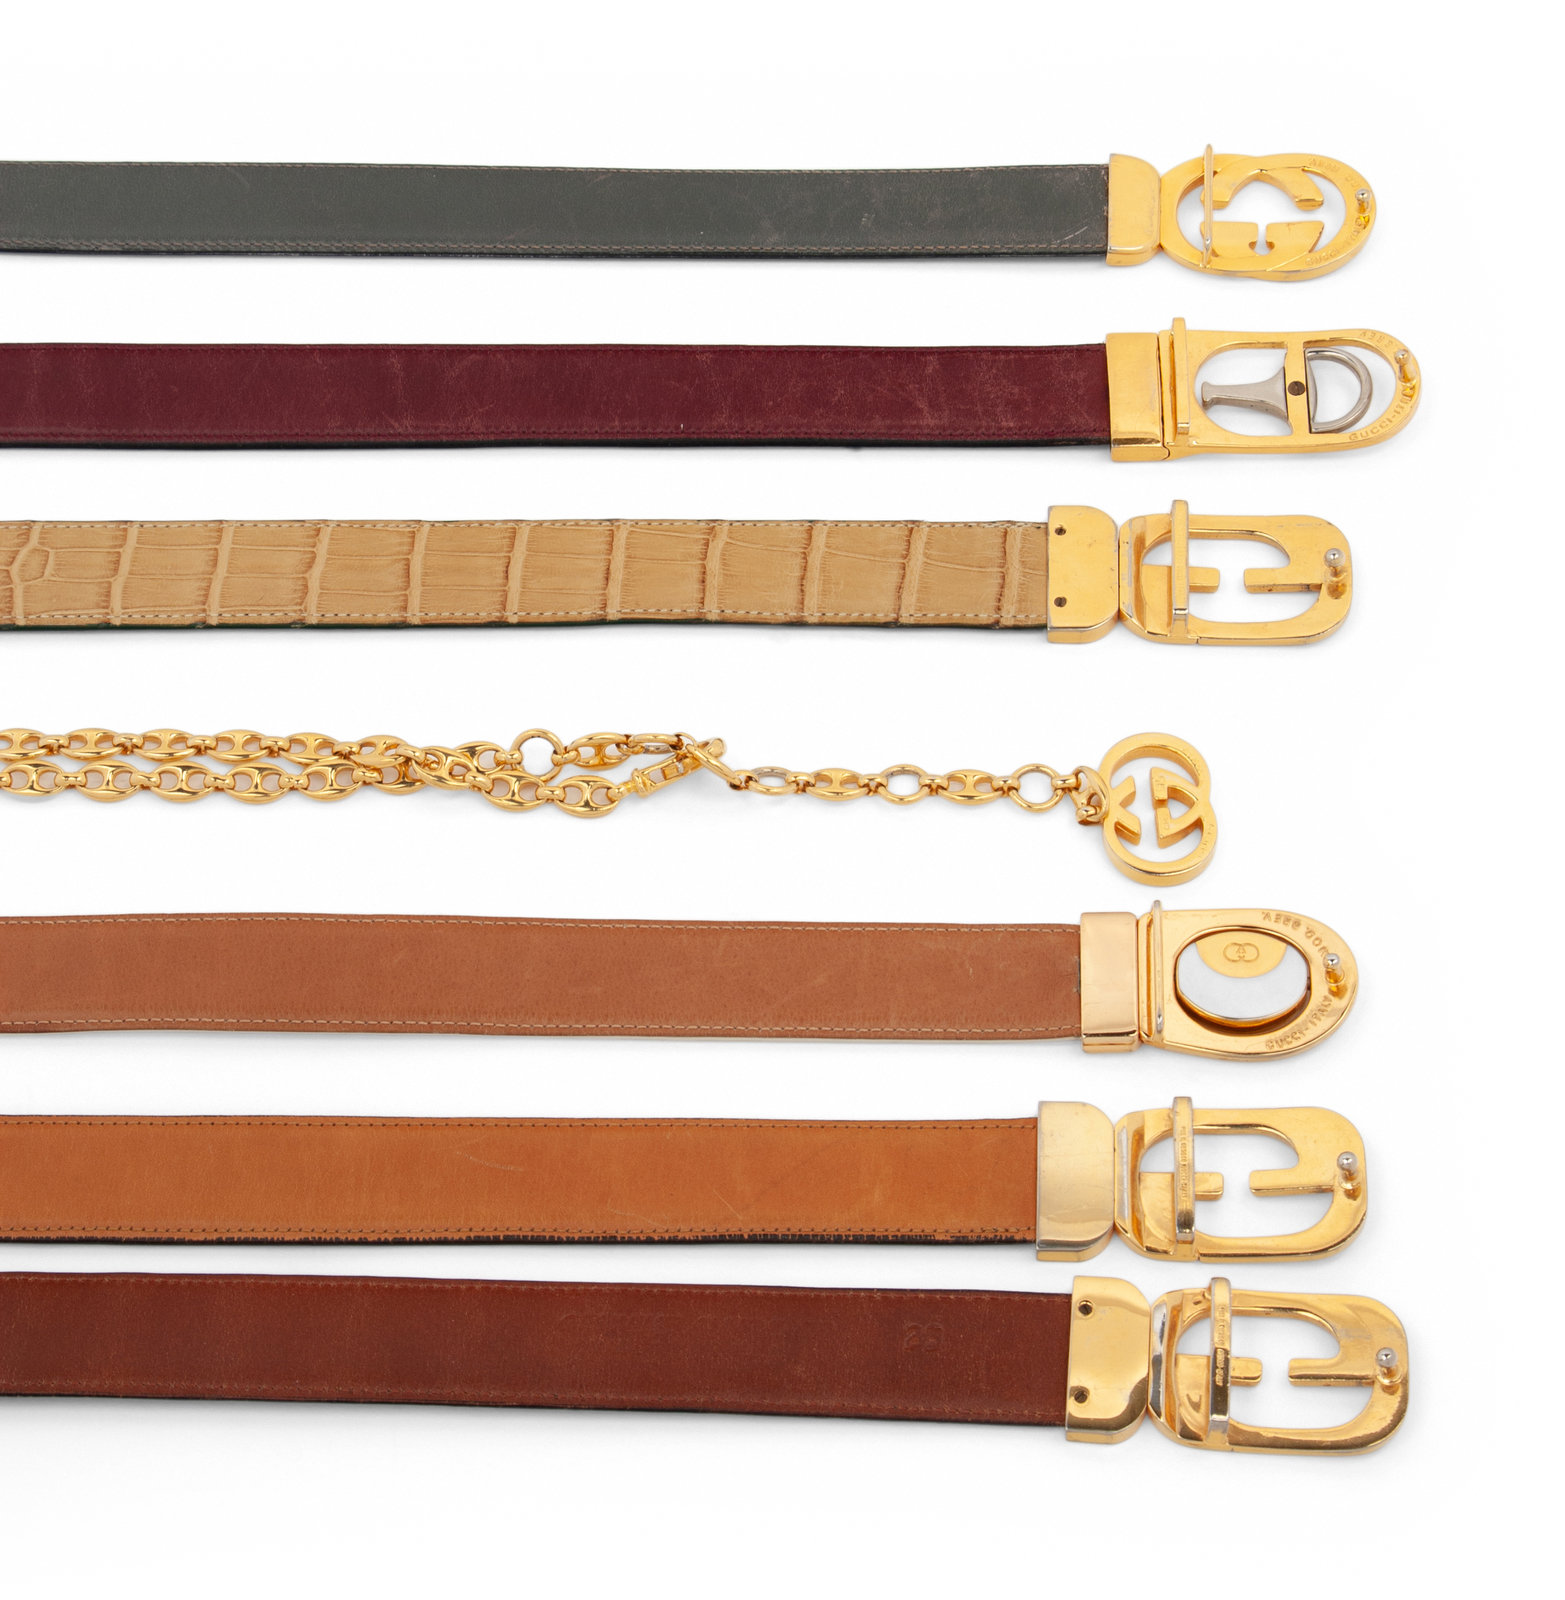 Gucci Belts for sale in San Diego, California